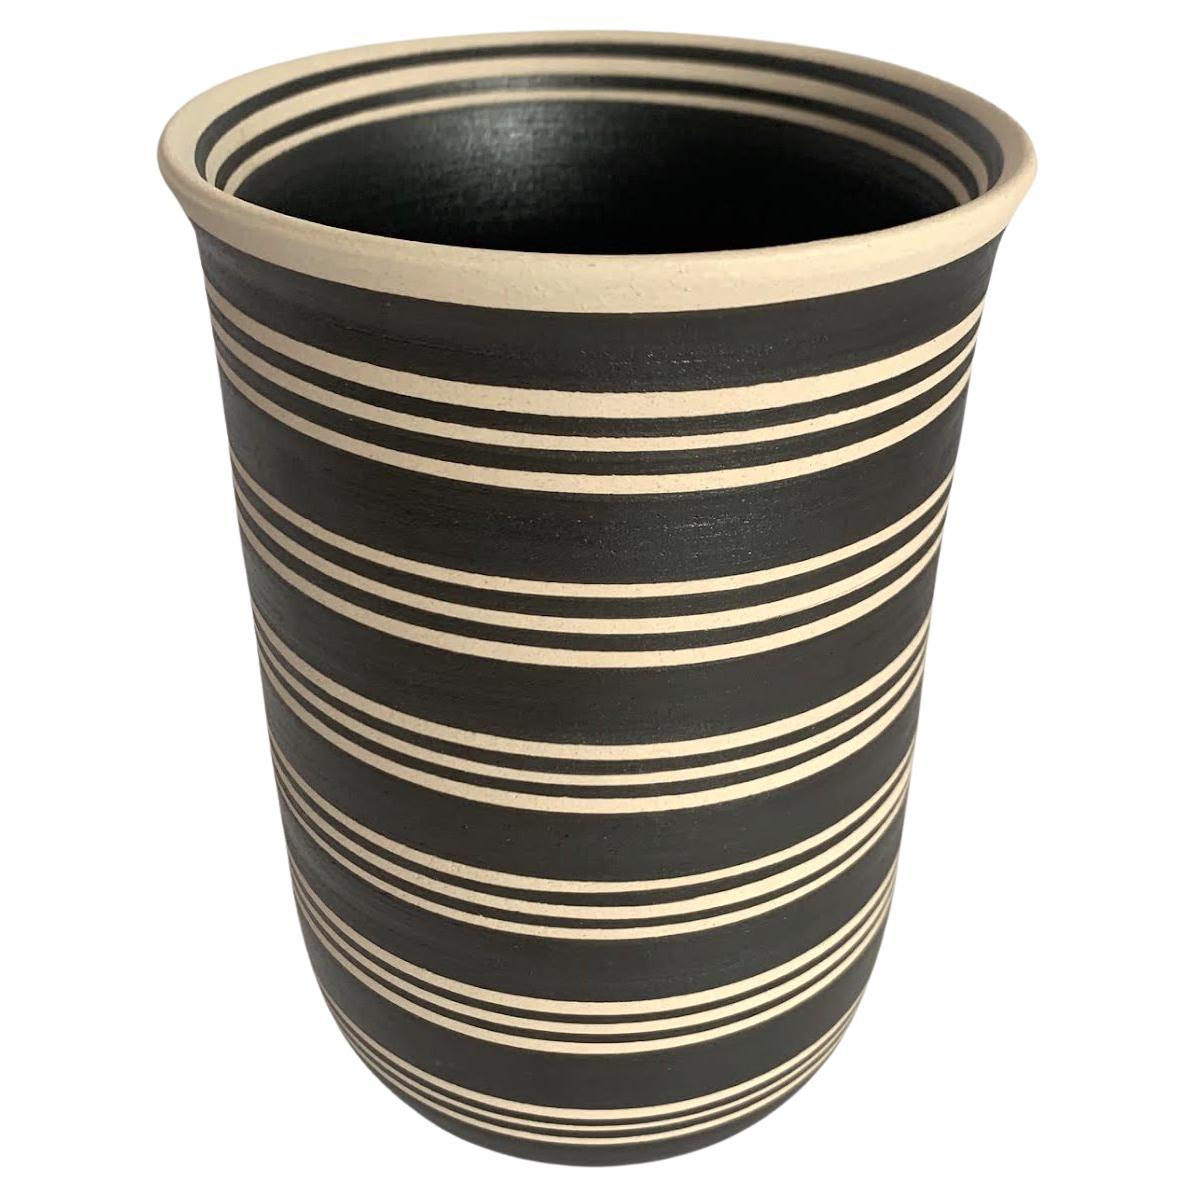 Black And Cream Triple Band Stripe Wide Opening Vase, Turkey, Contemporary For Sale